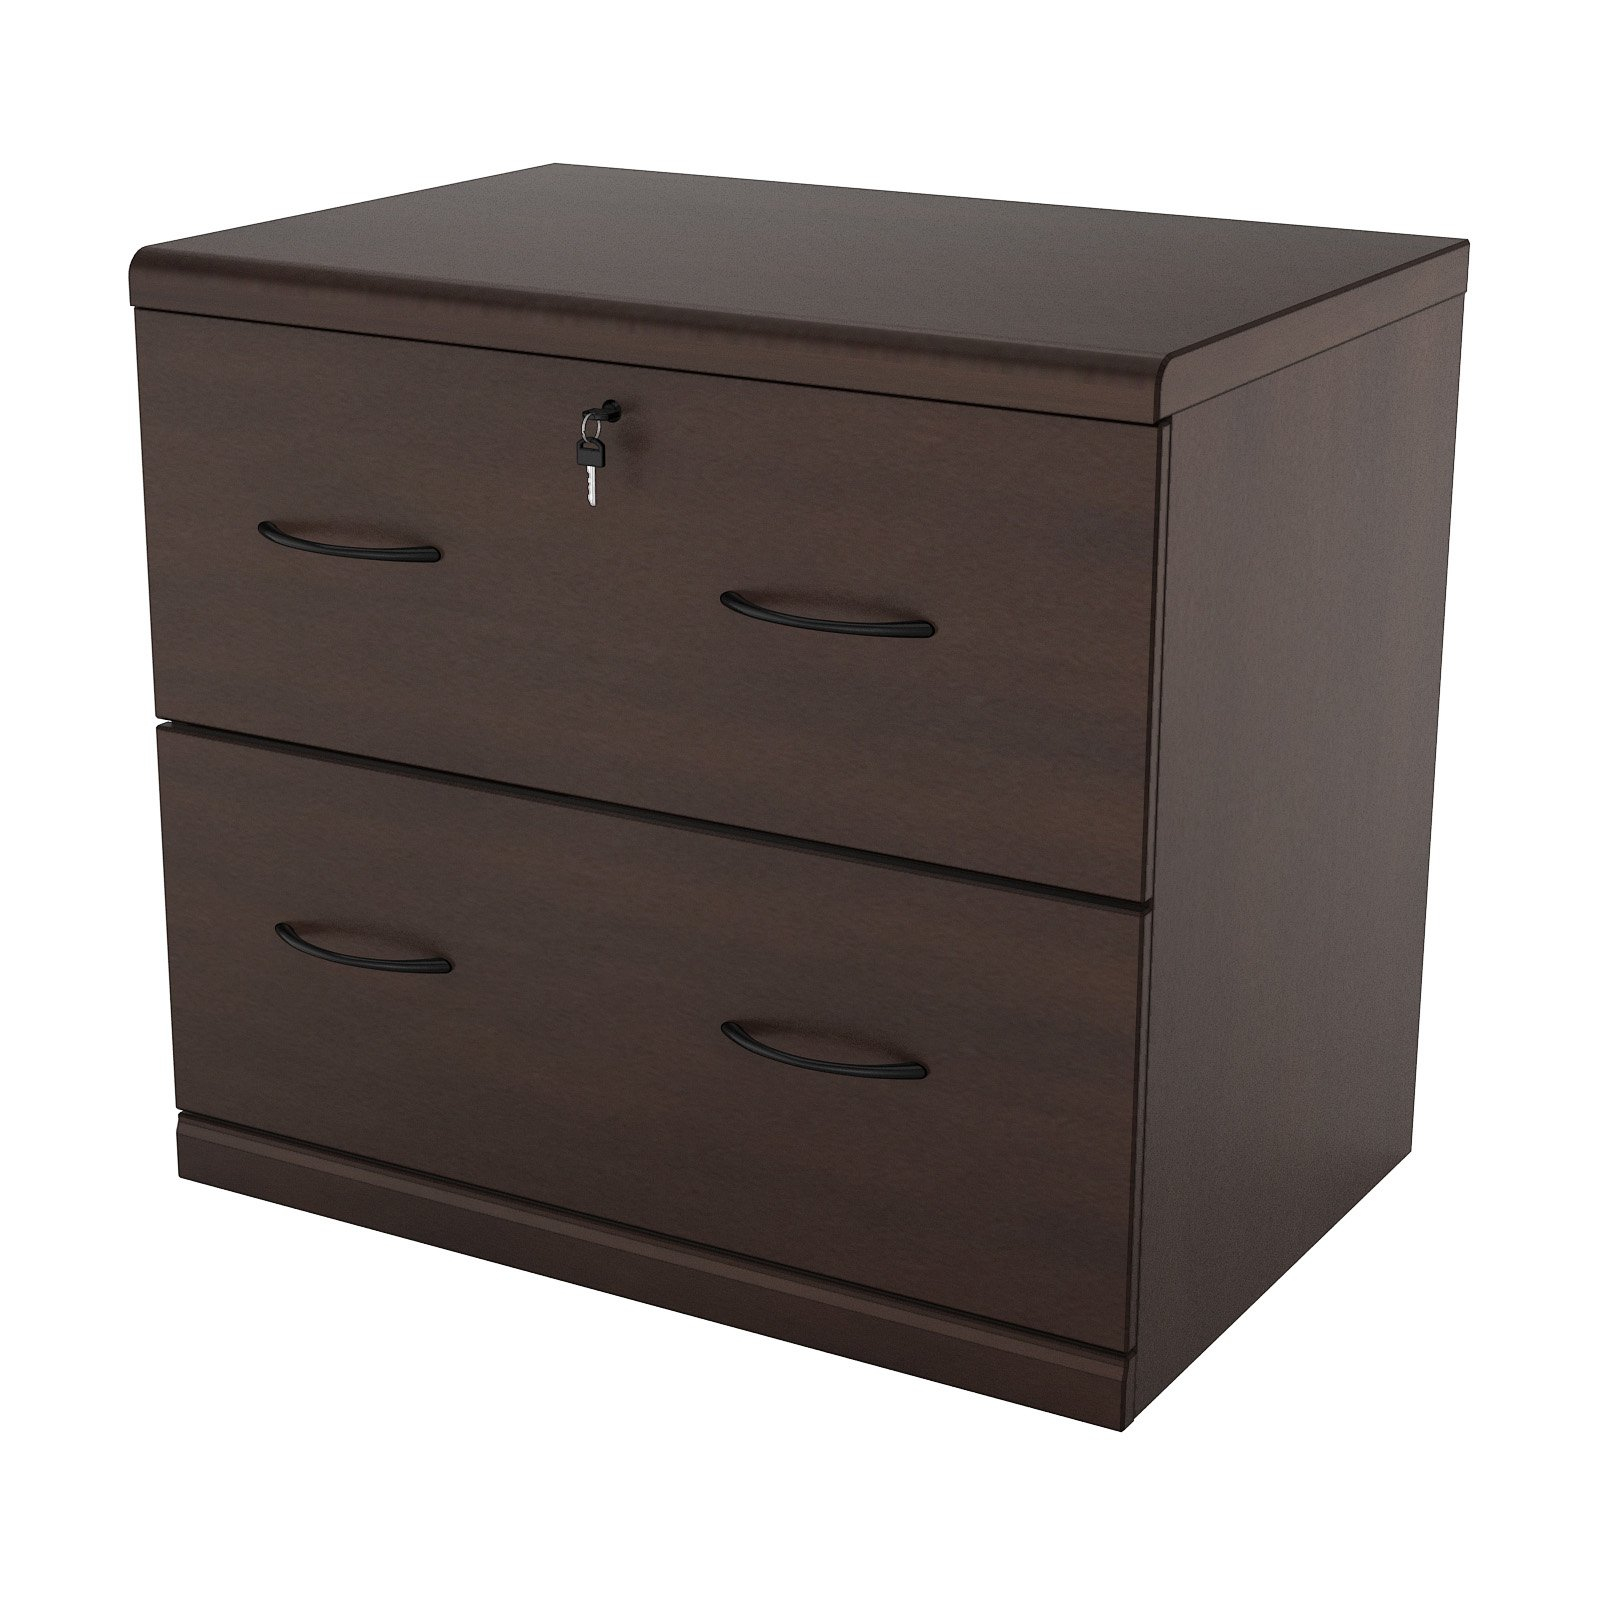 2 Drawer Lateral Wood Lockable Filing Cabinet Espresso Walmart intended for sizing 1600 X 1600